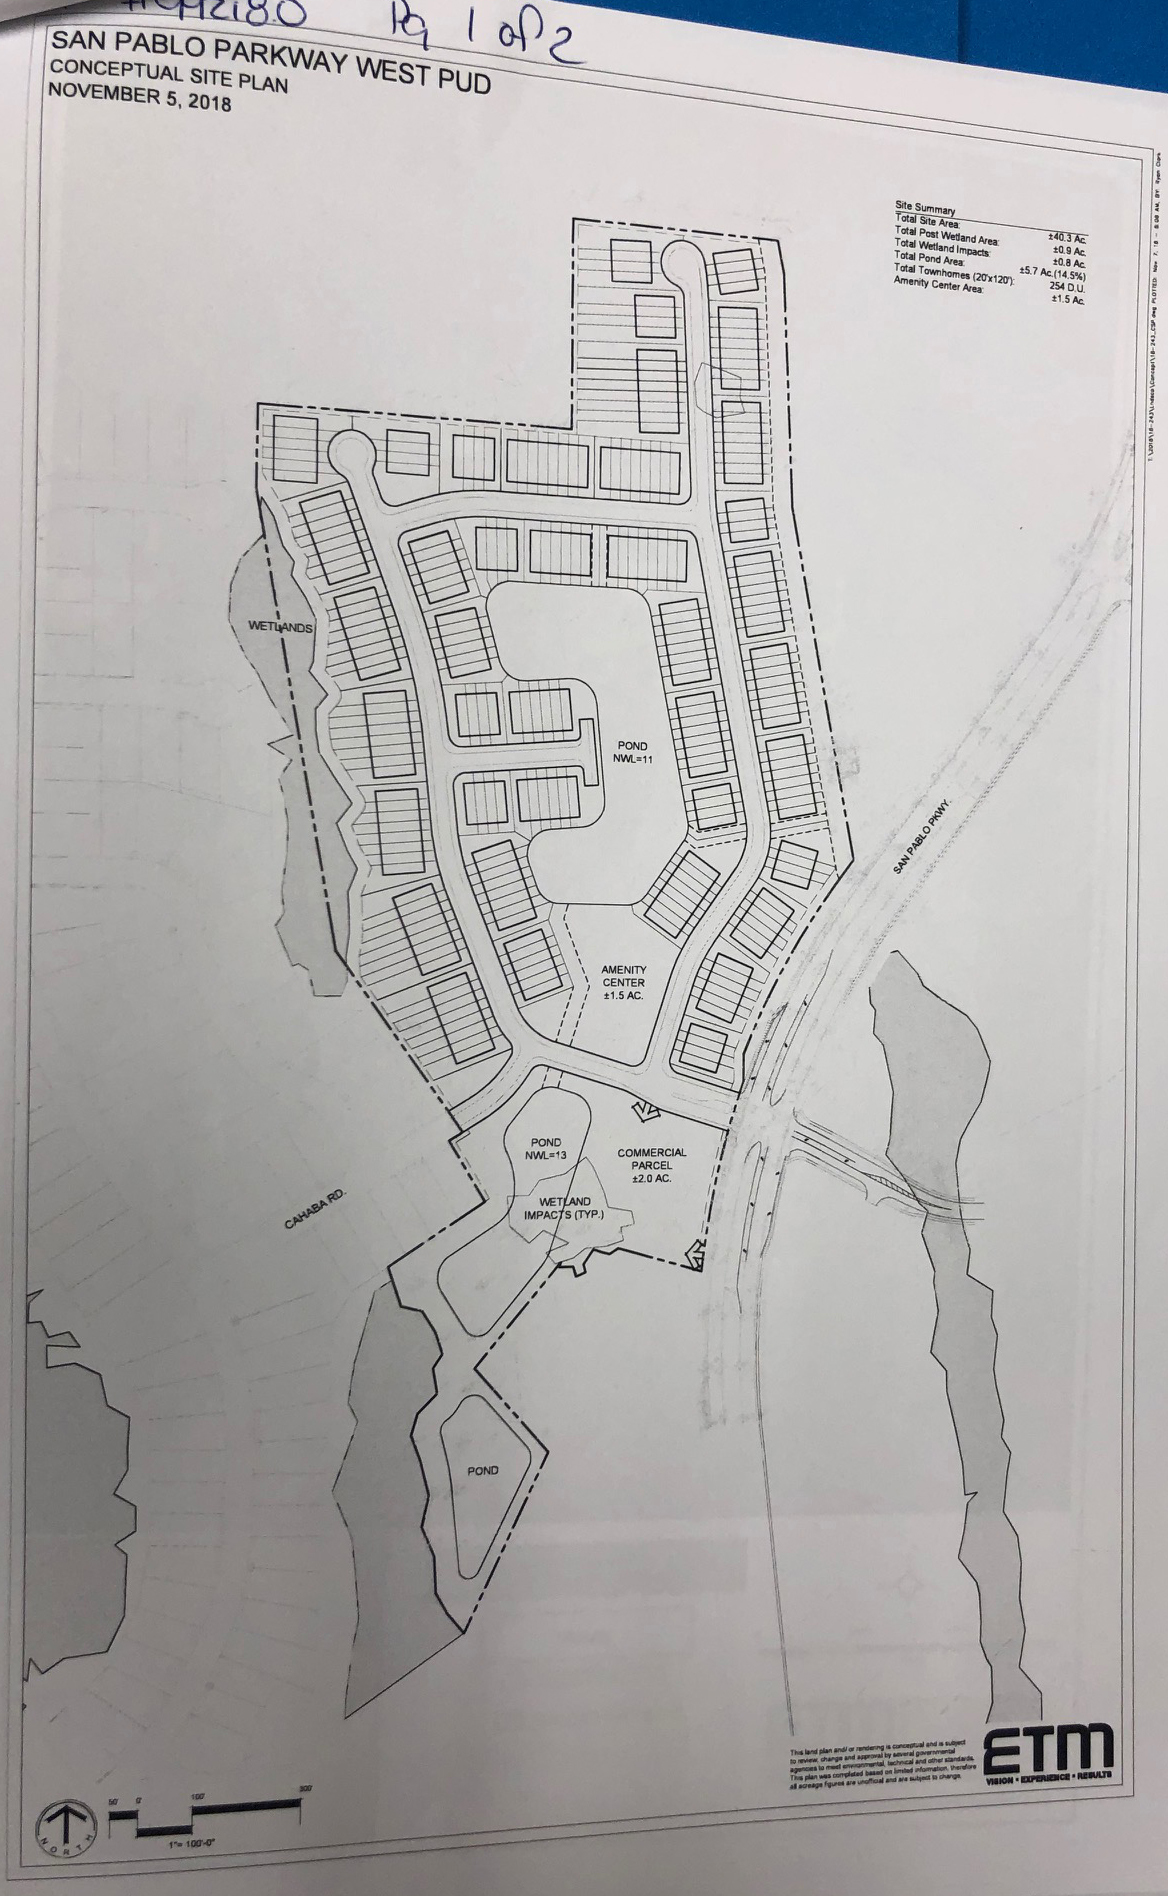 The site plan for the development.